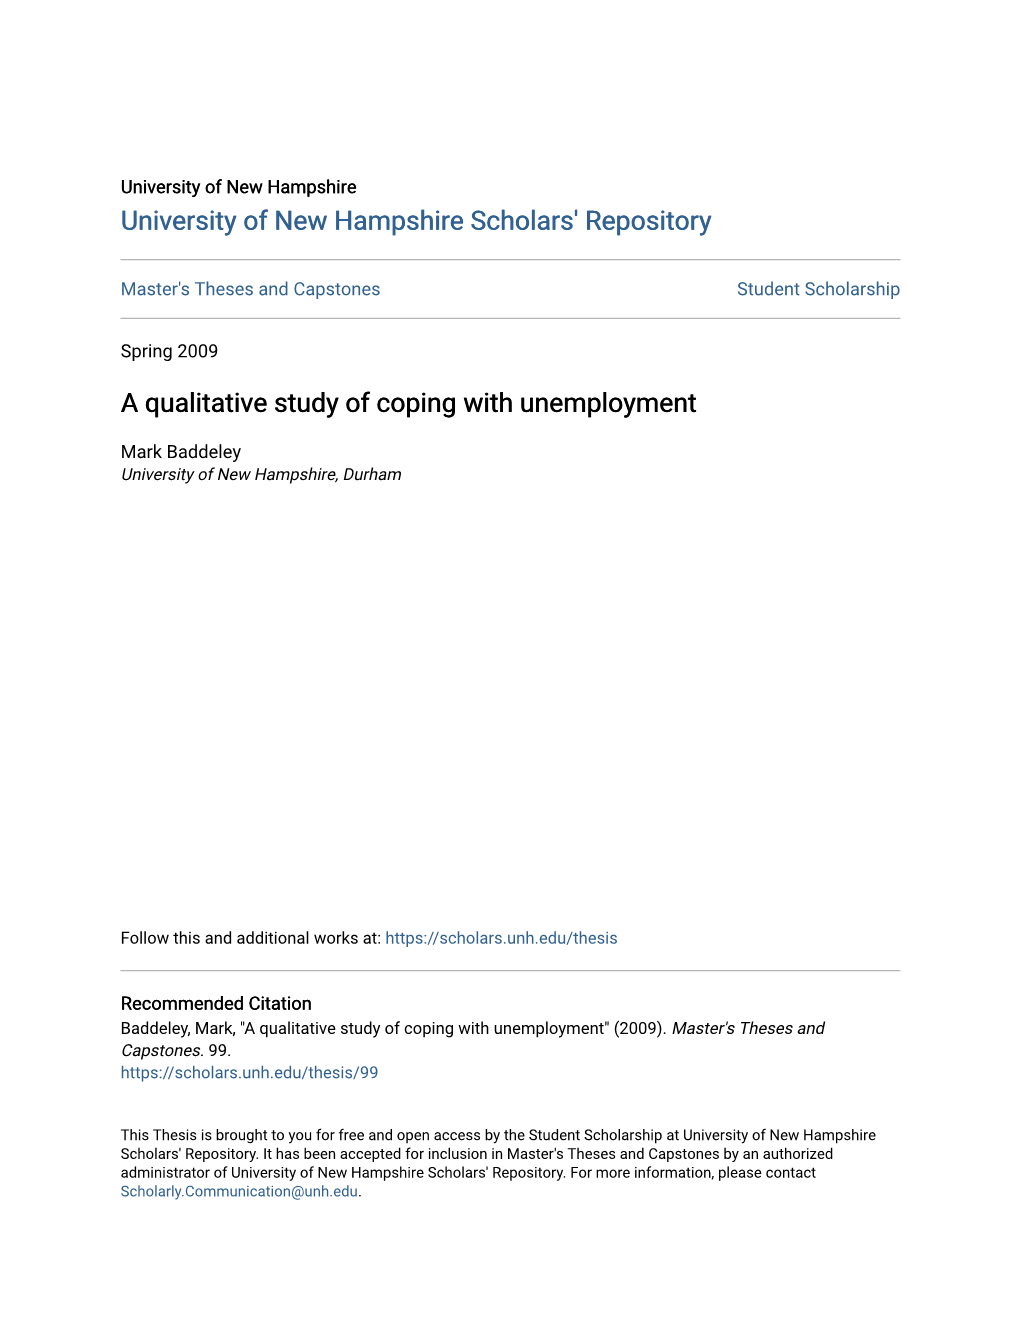 A Qualitative Study of Coping with Unemployment